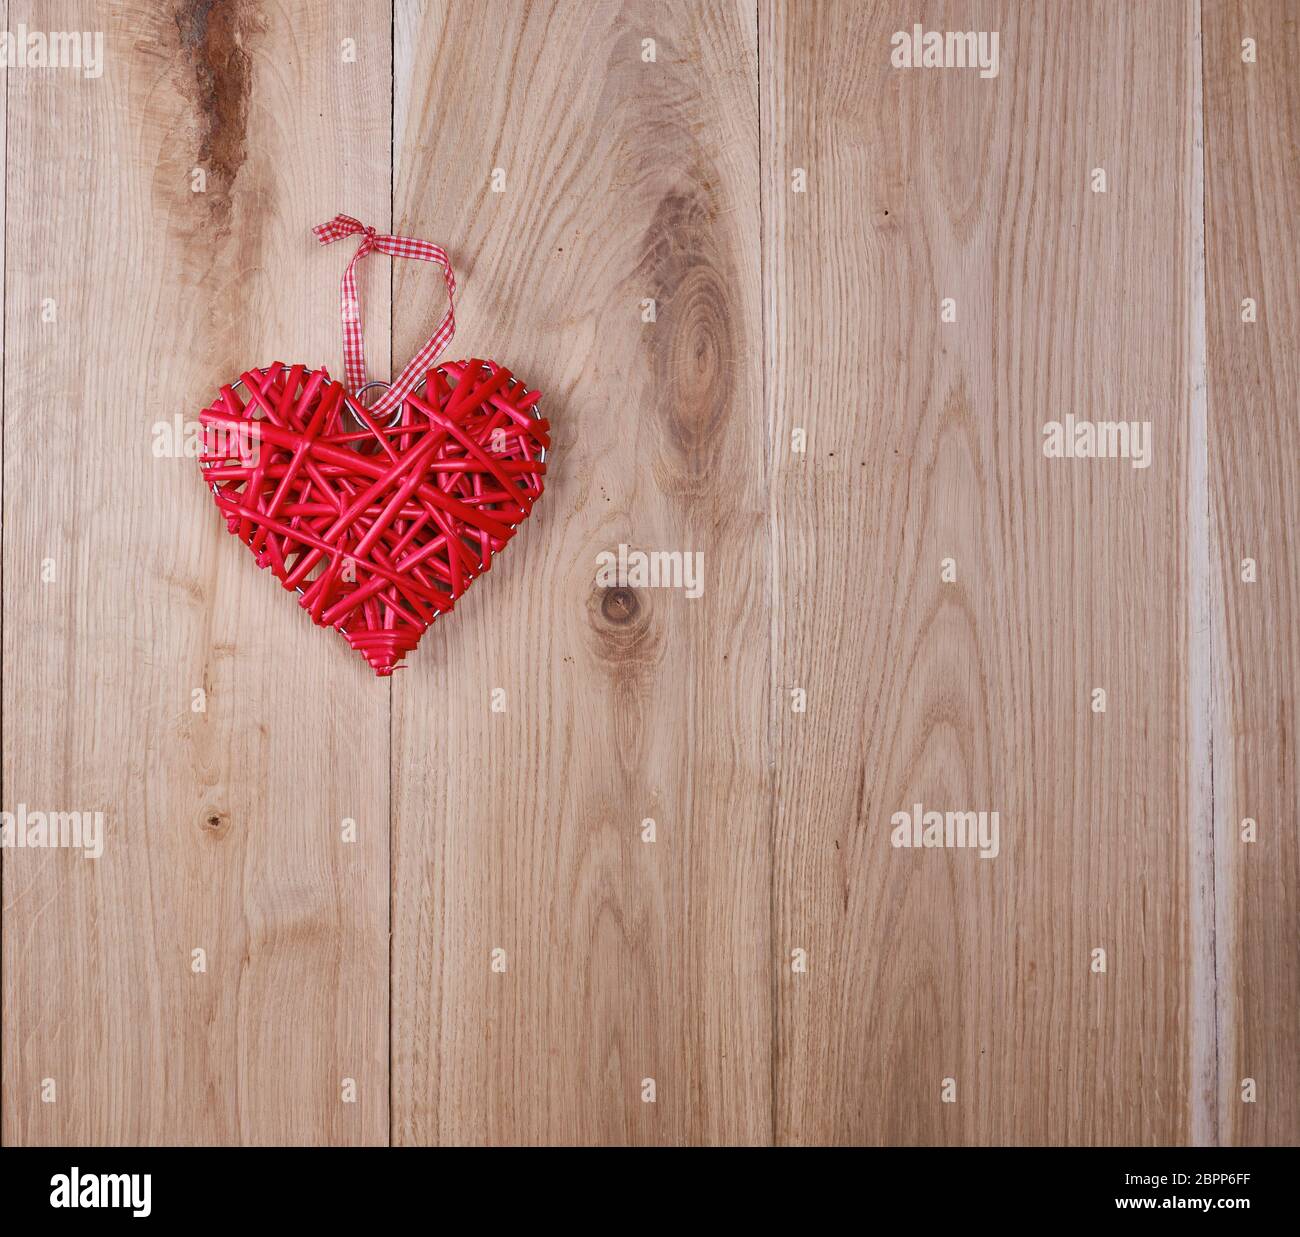 wooden background of oak boards and a red wicker heart, copy space Stock Photo